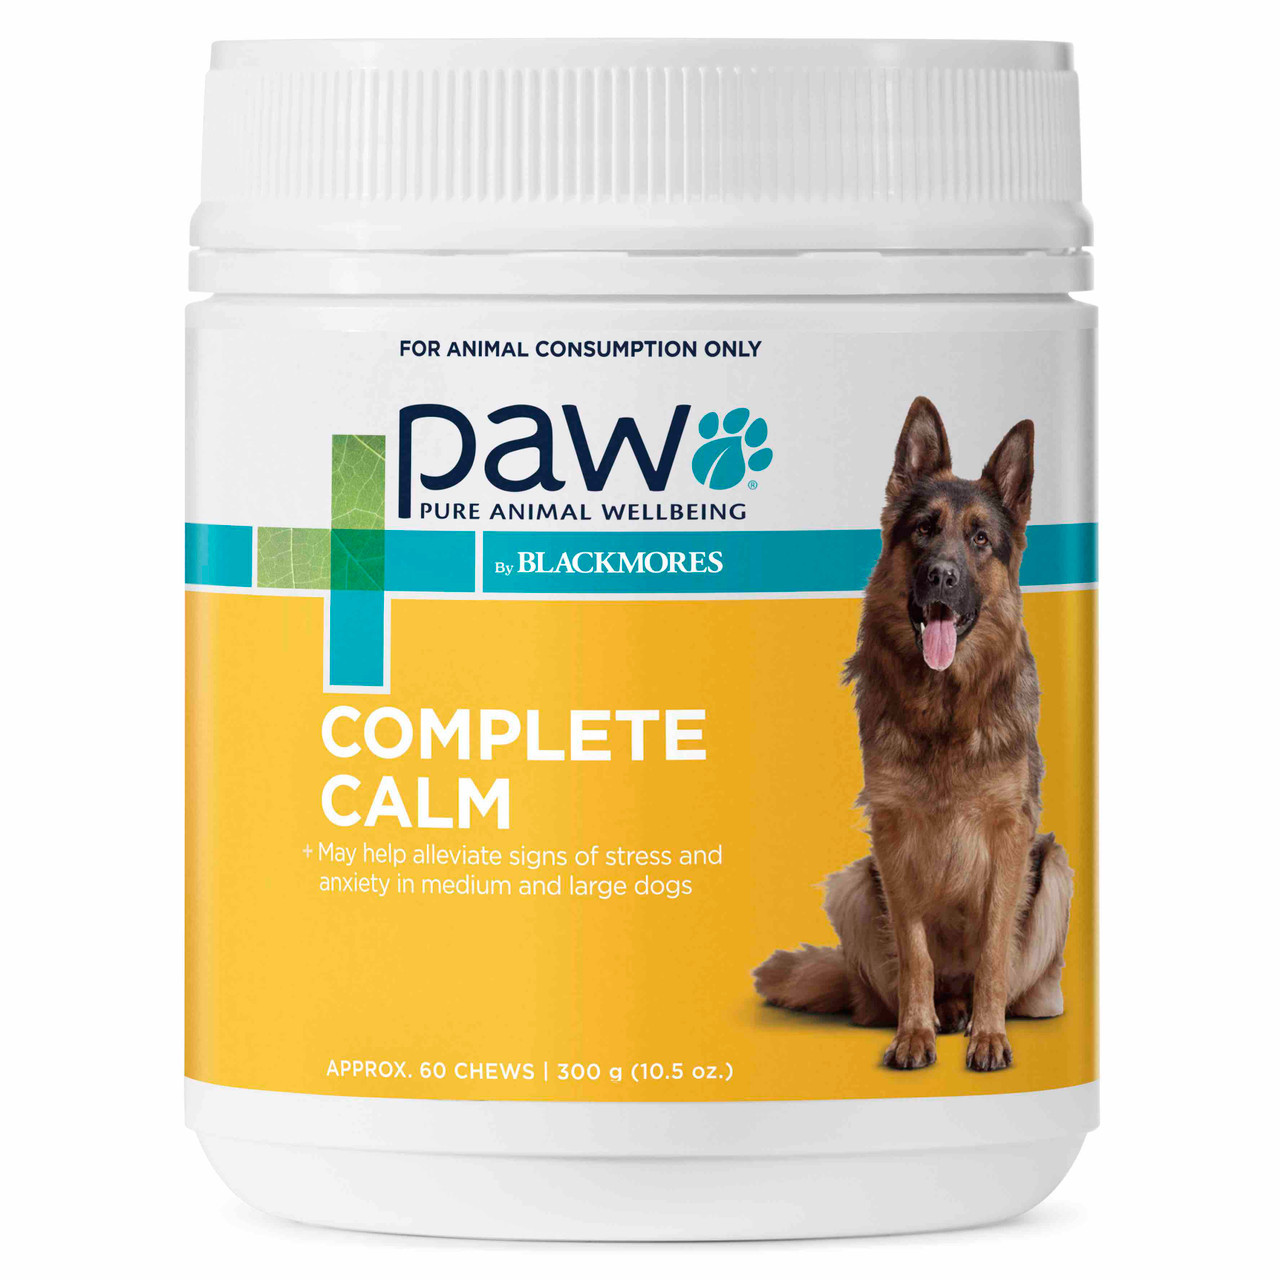 20% rabat på PAW by Blackmores Complete Calm Multivitamin + Tryptophan Chews 300g (10.5 oz) hos Atlantic Pet Products